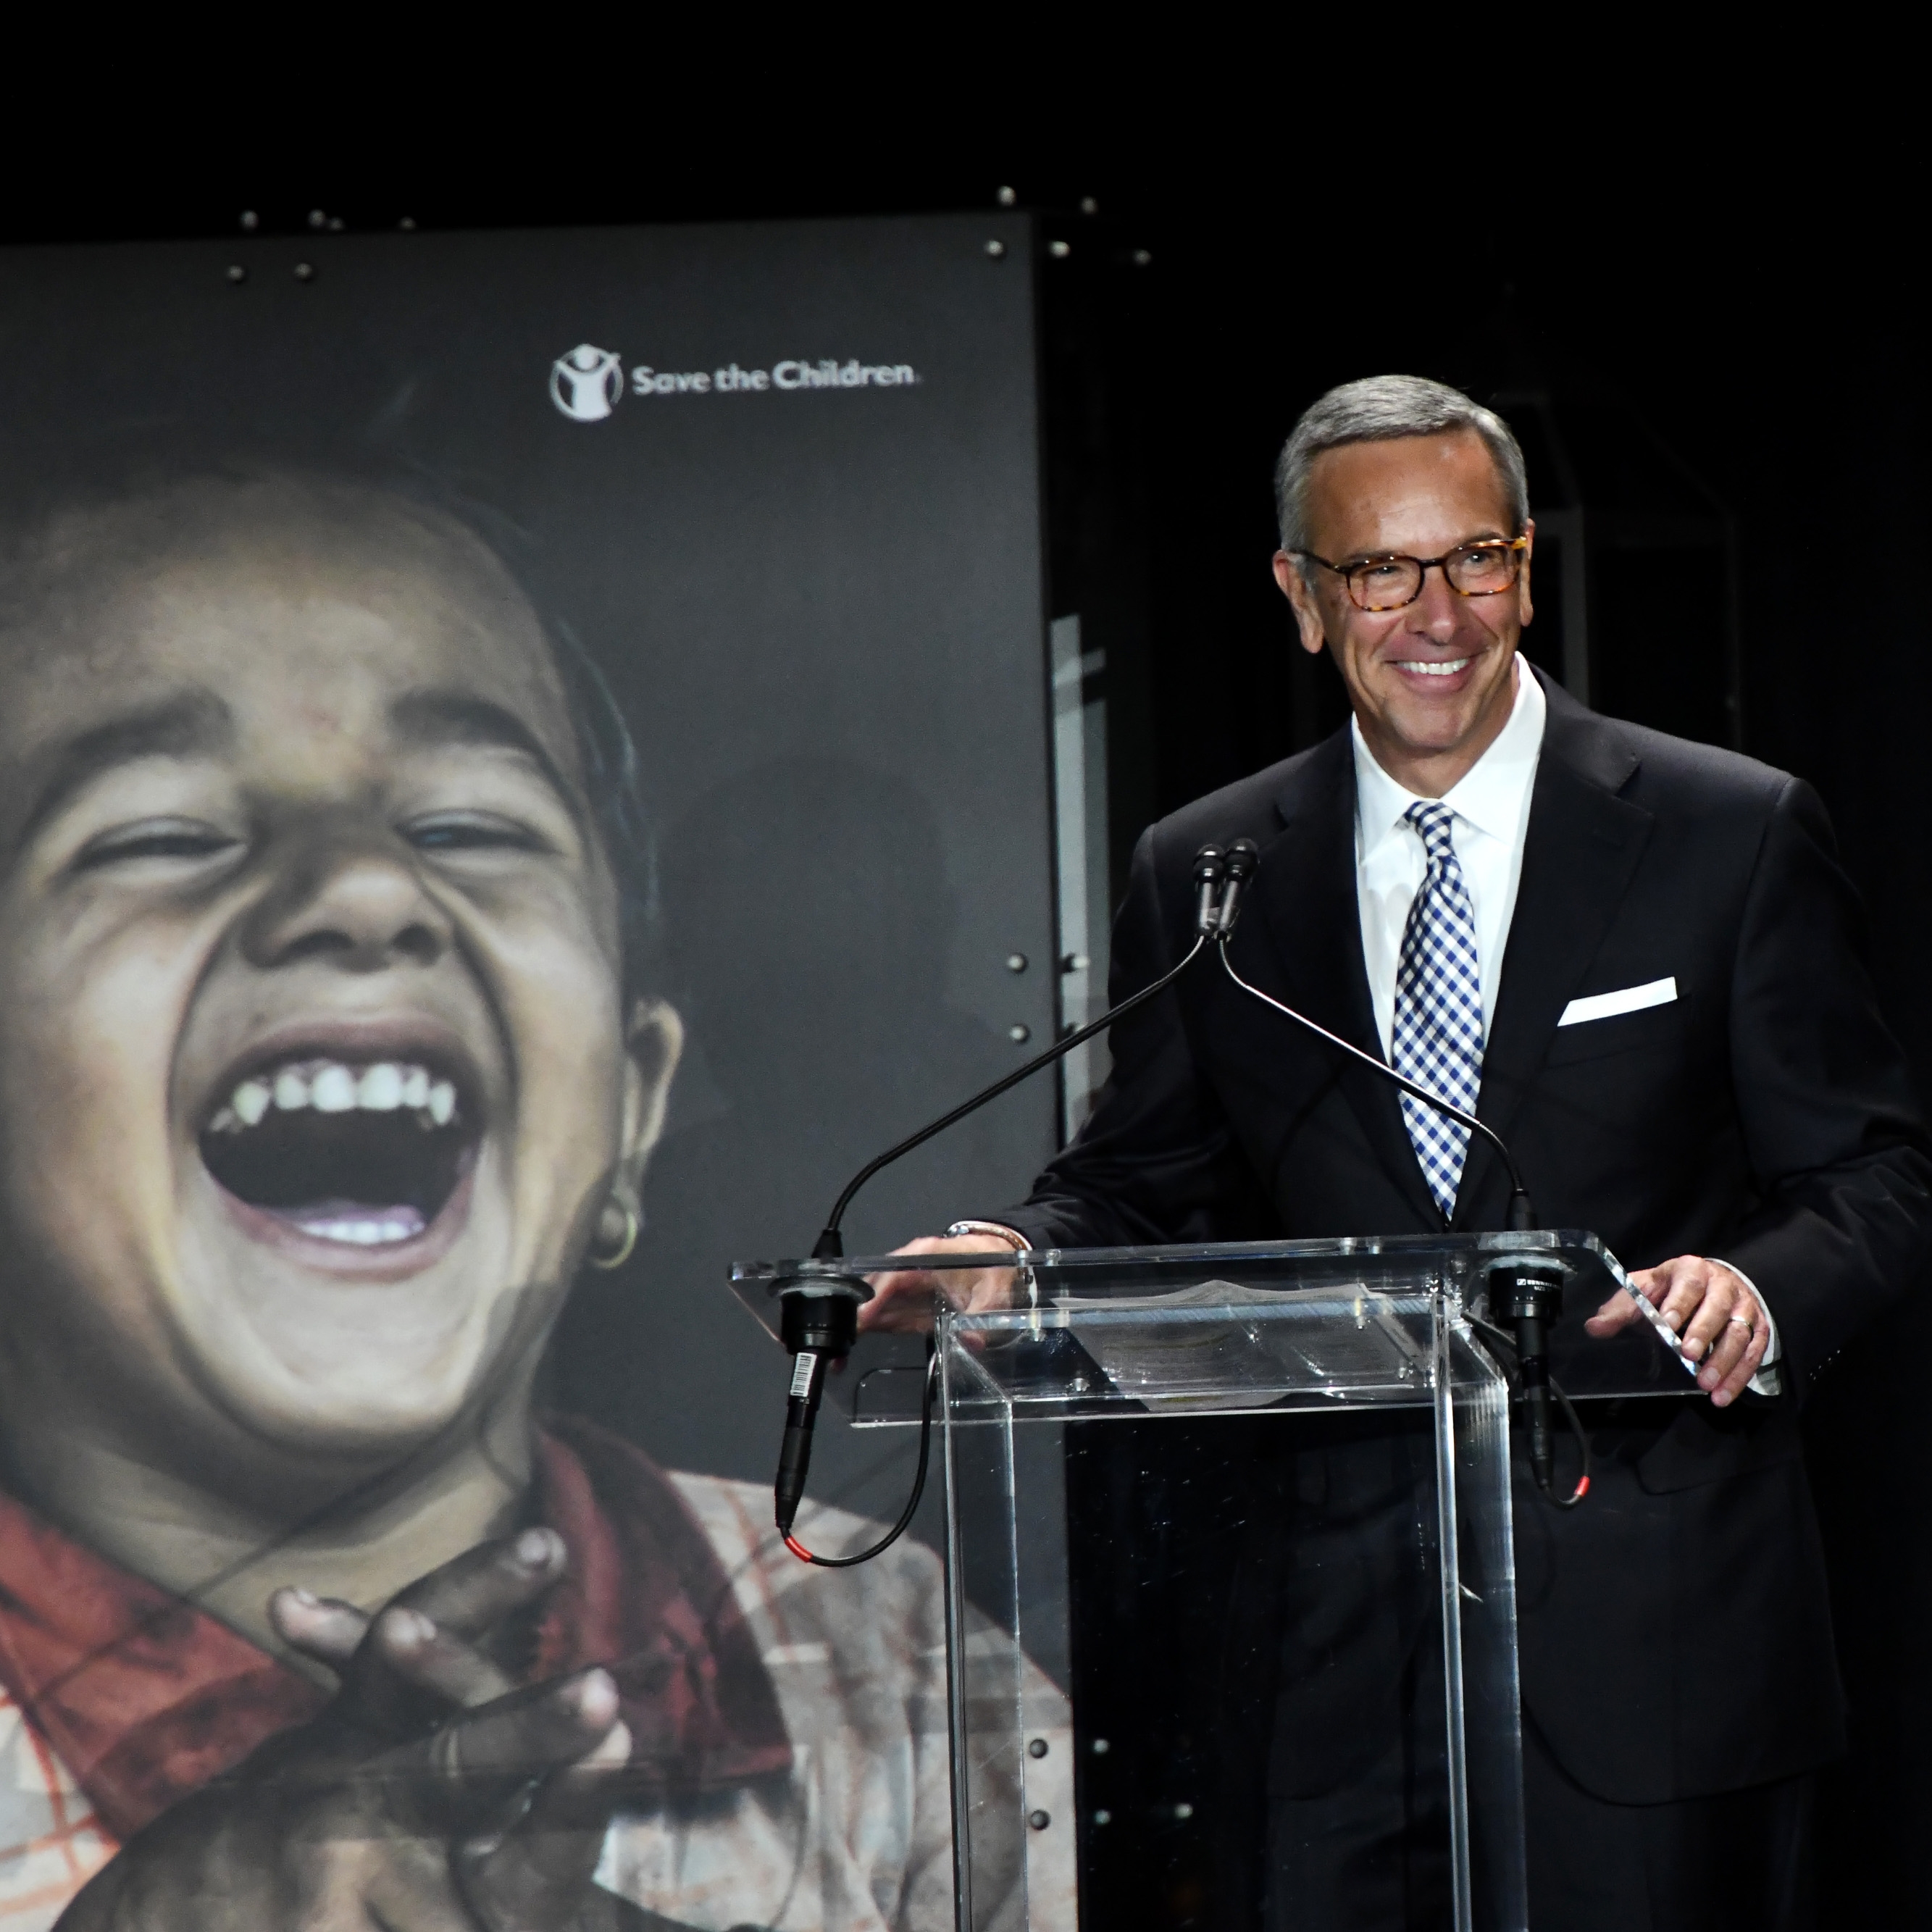 Save the Children Trustee and Johnson & Johnson Executive Vice President speaks on stage during the 6th Annual Save the Children Illumination Gala at the American Museum of Natural History on November 14, 2018 in New York City. Photo credit: Noam Galai/Getty Images for Save the Children.